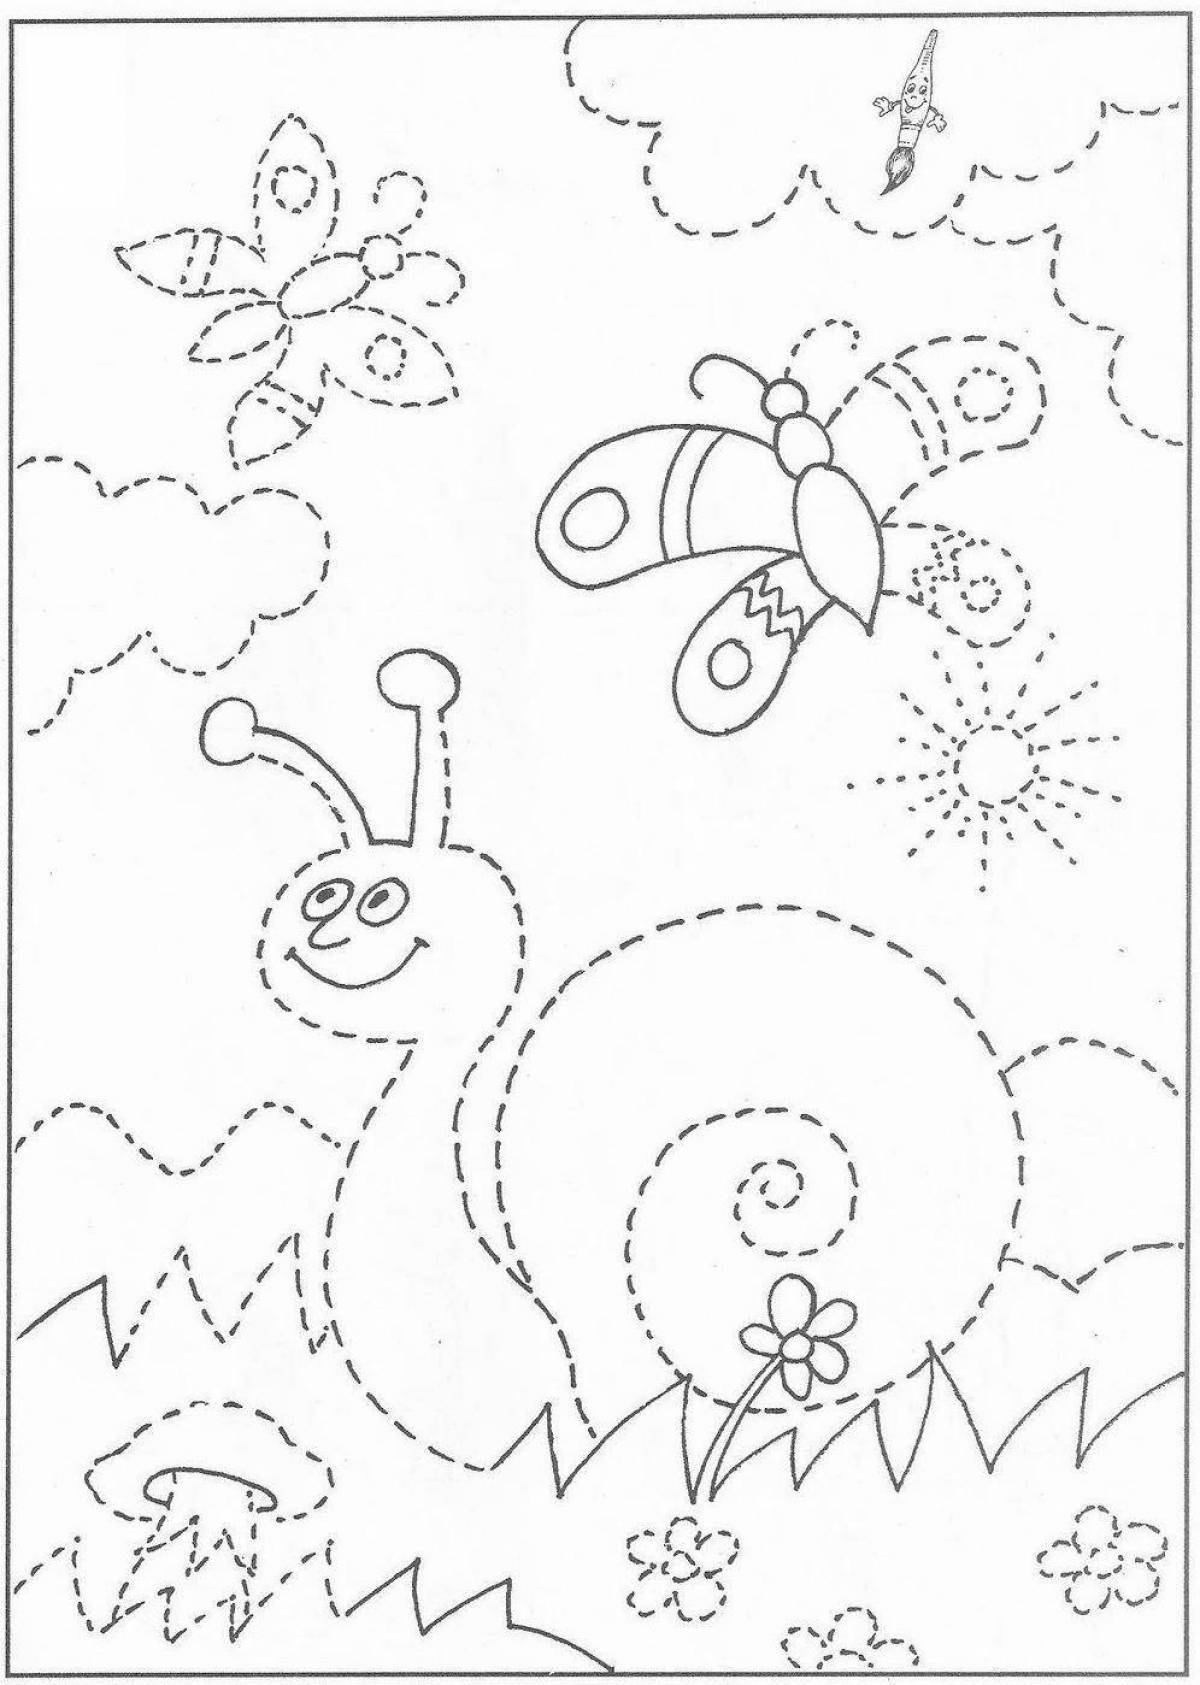 Exciting motor skill coloring page